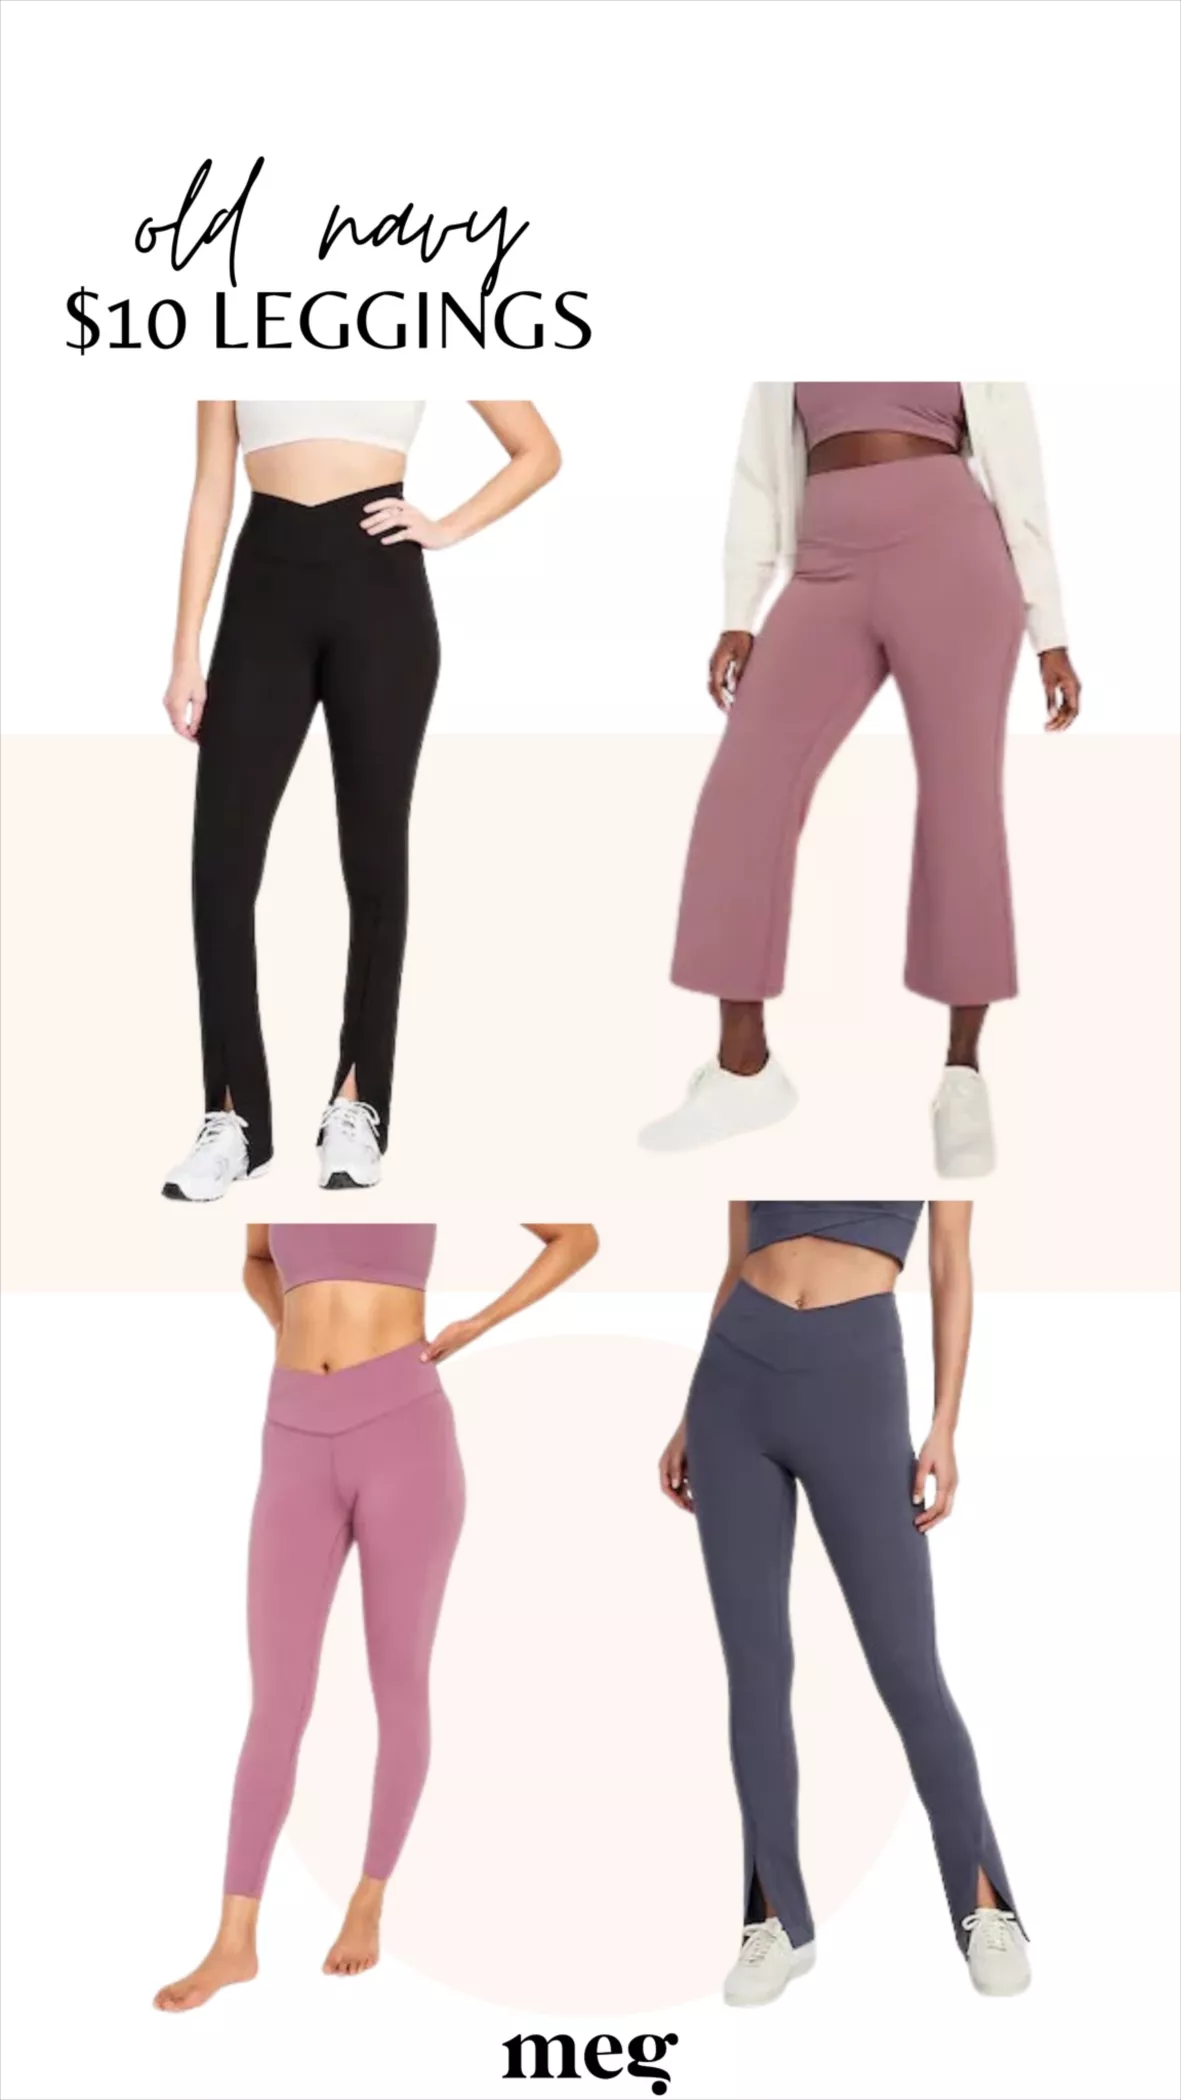 Extra High-Waisted PowerChill Cropped Wide-Leg Yoga Pants for